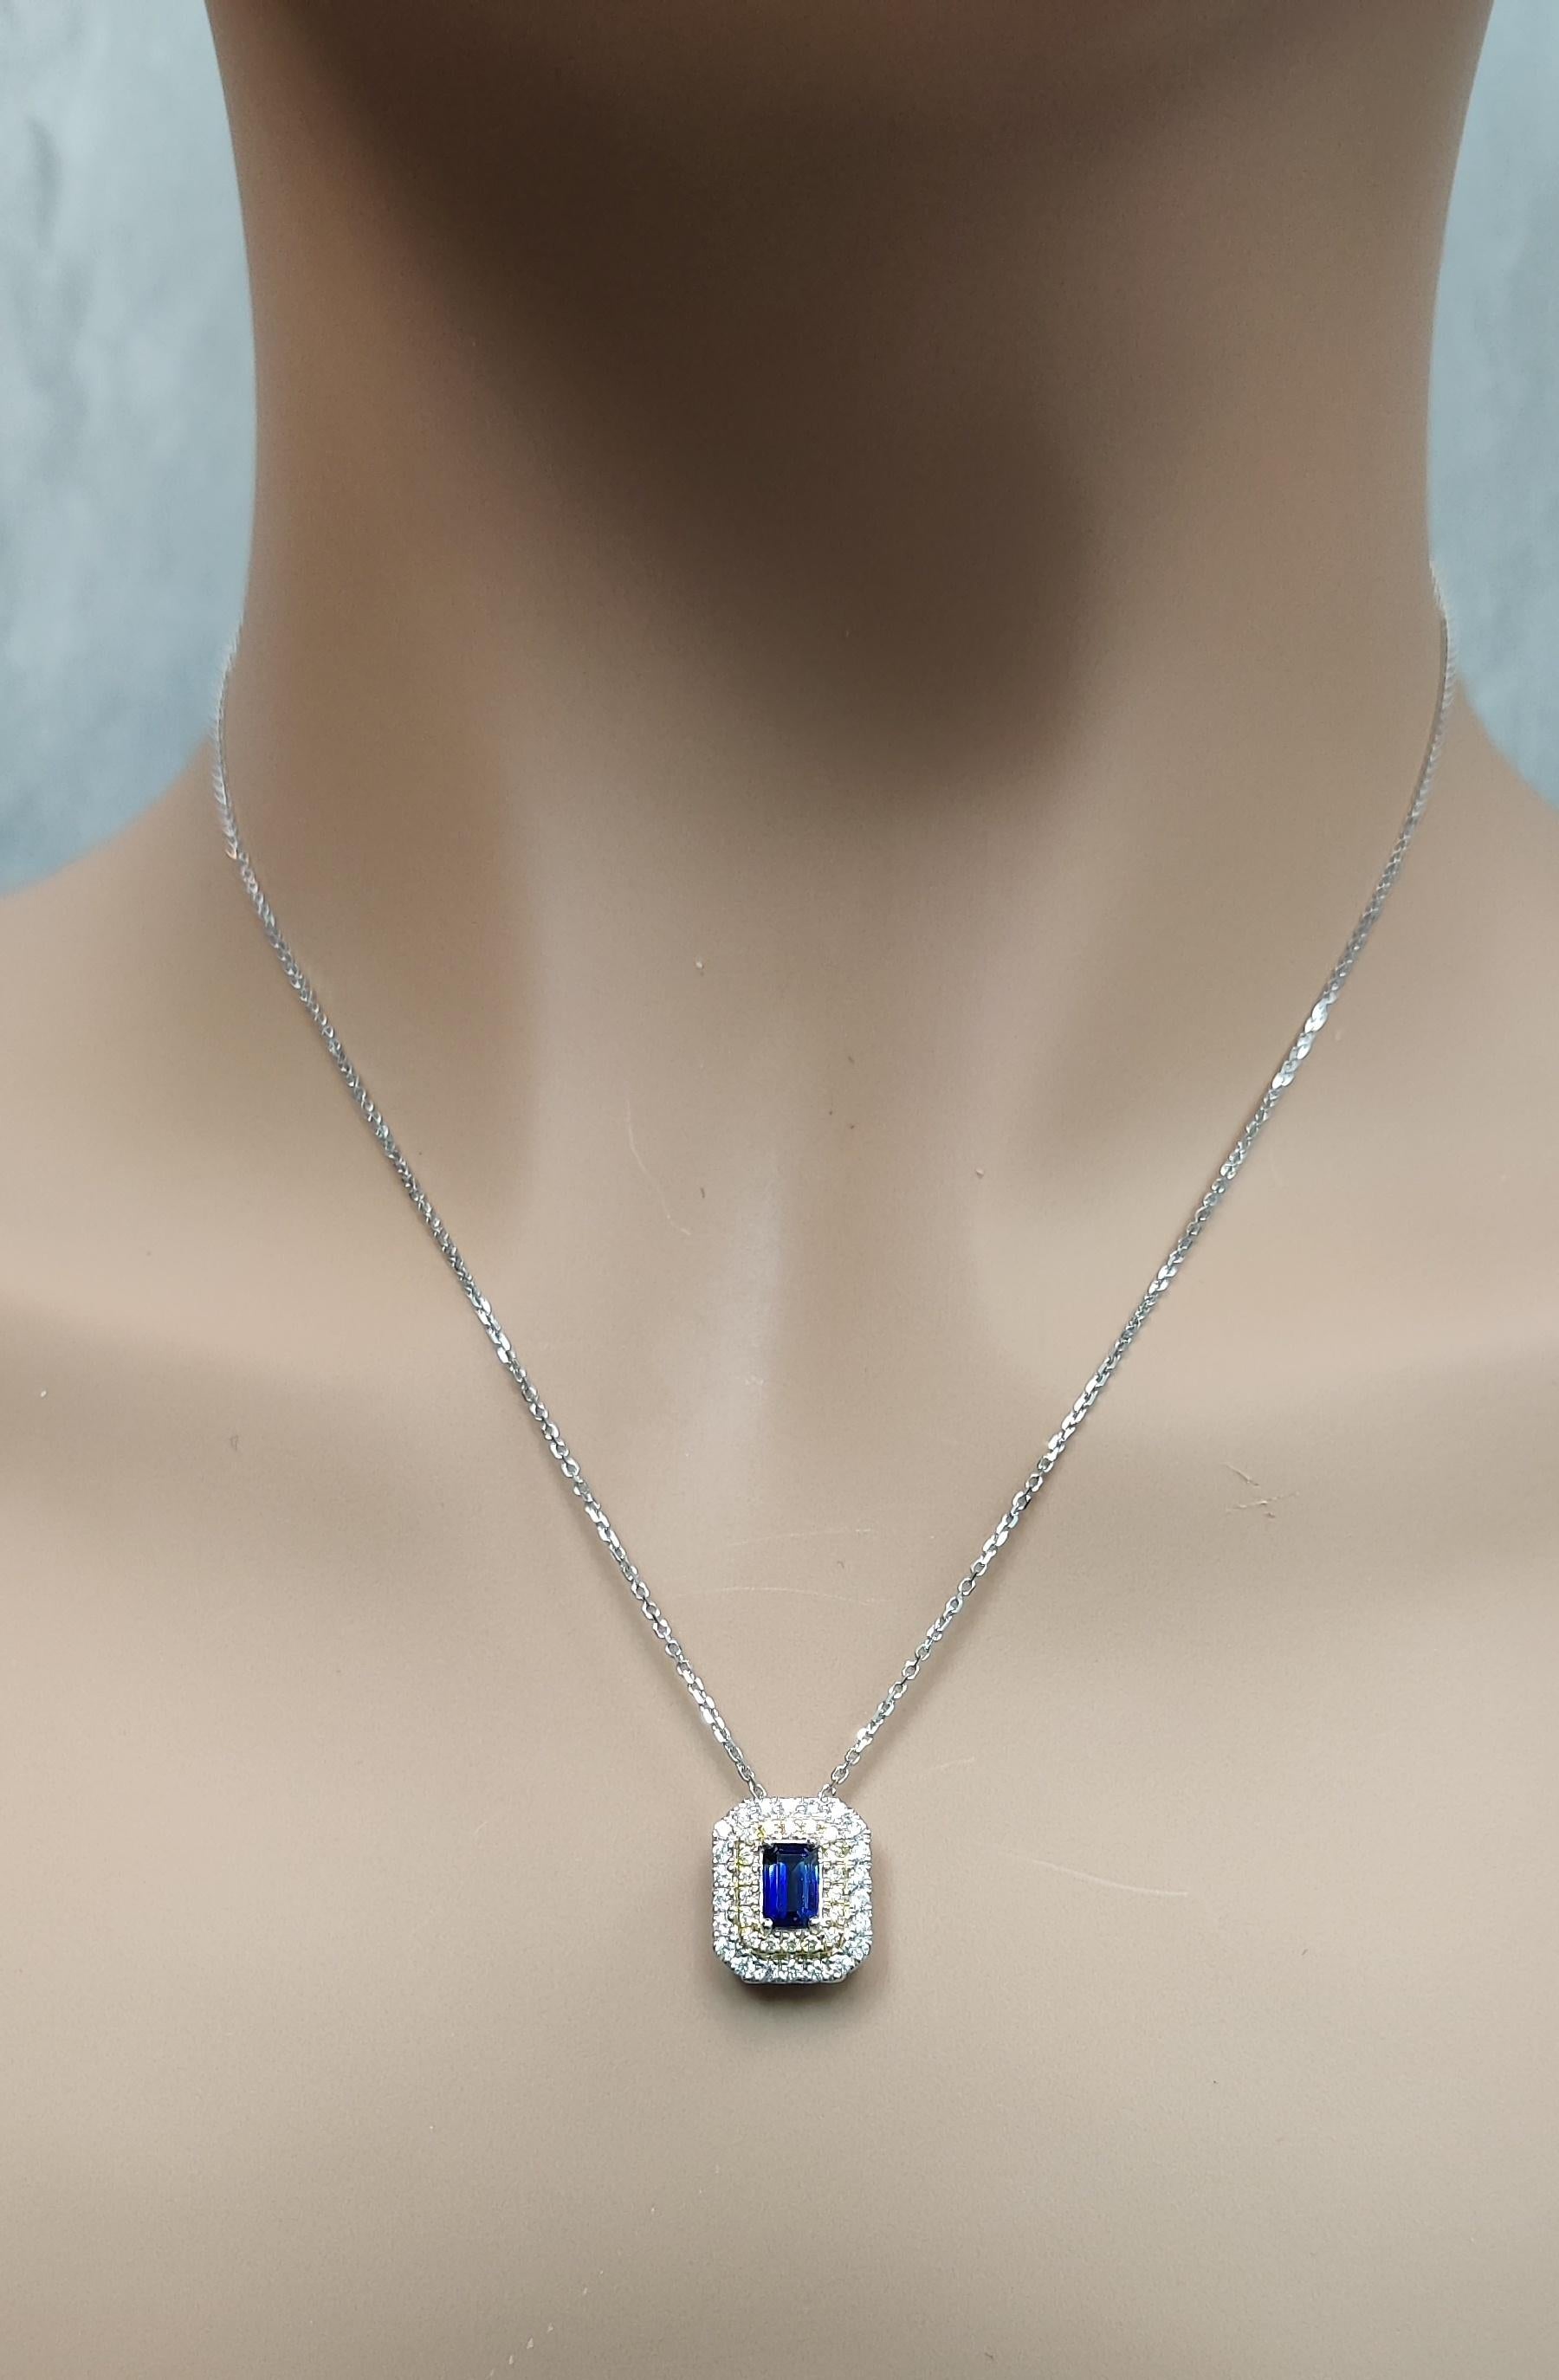 Natural Blue Emerald Cut Sapphire and Yellow/White Diamond 1.05 Carat TW Pendant For Sale 2